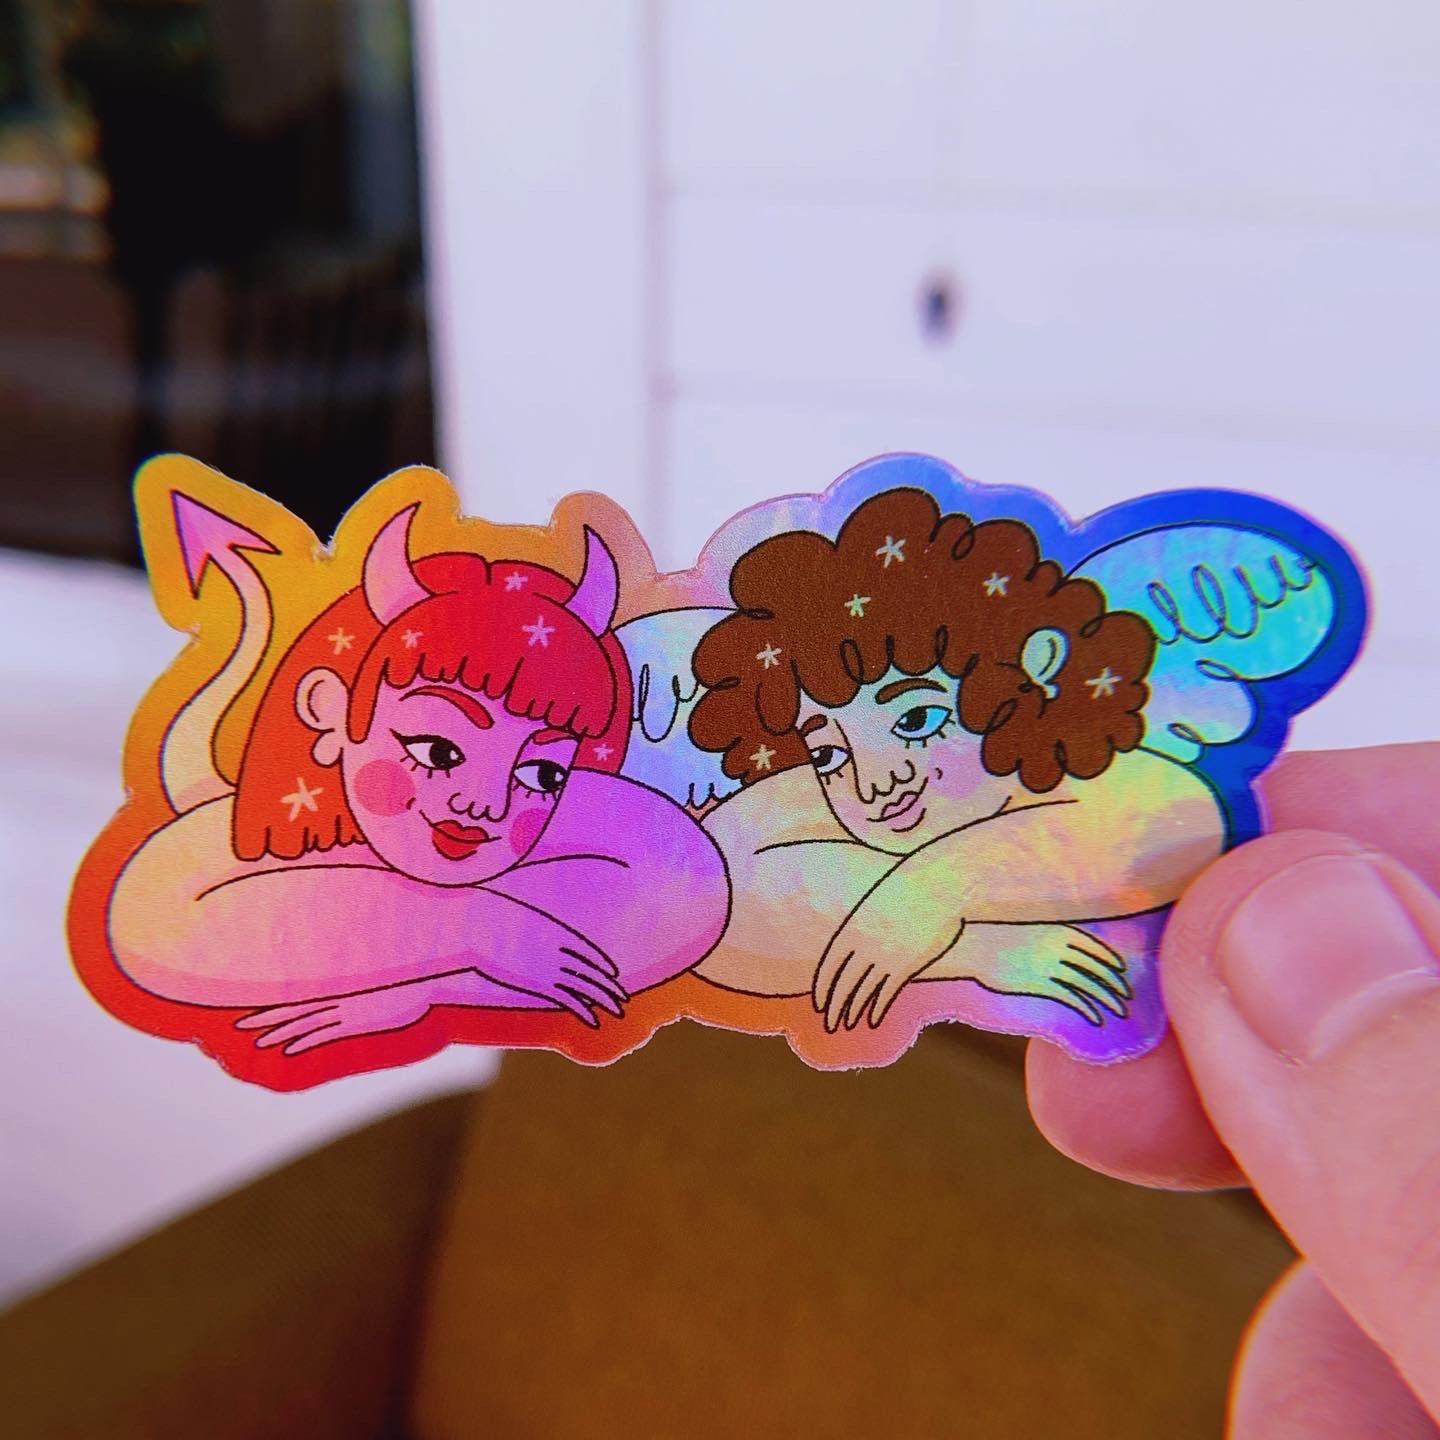 Opposites Attract - 3" holographic sticker